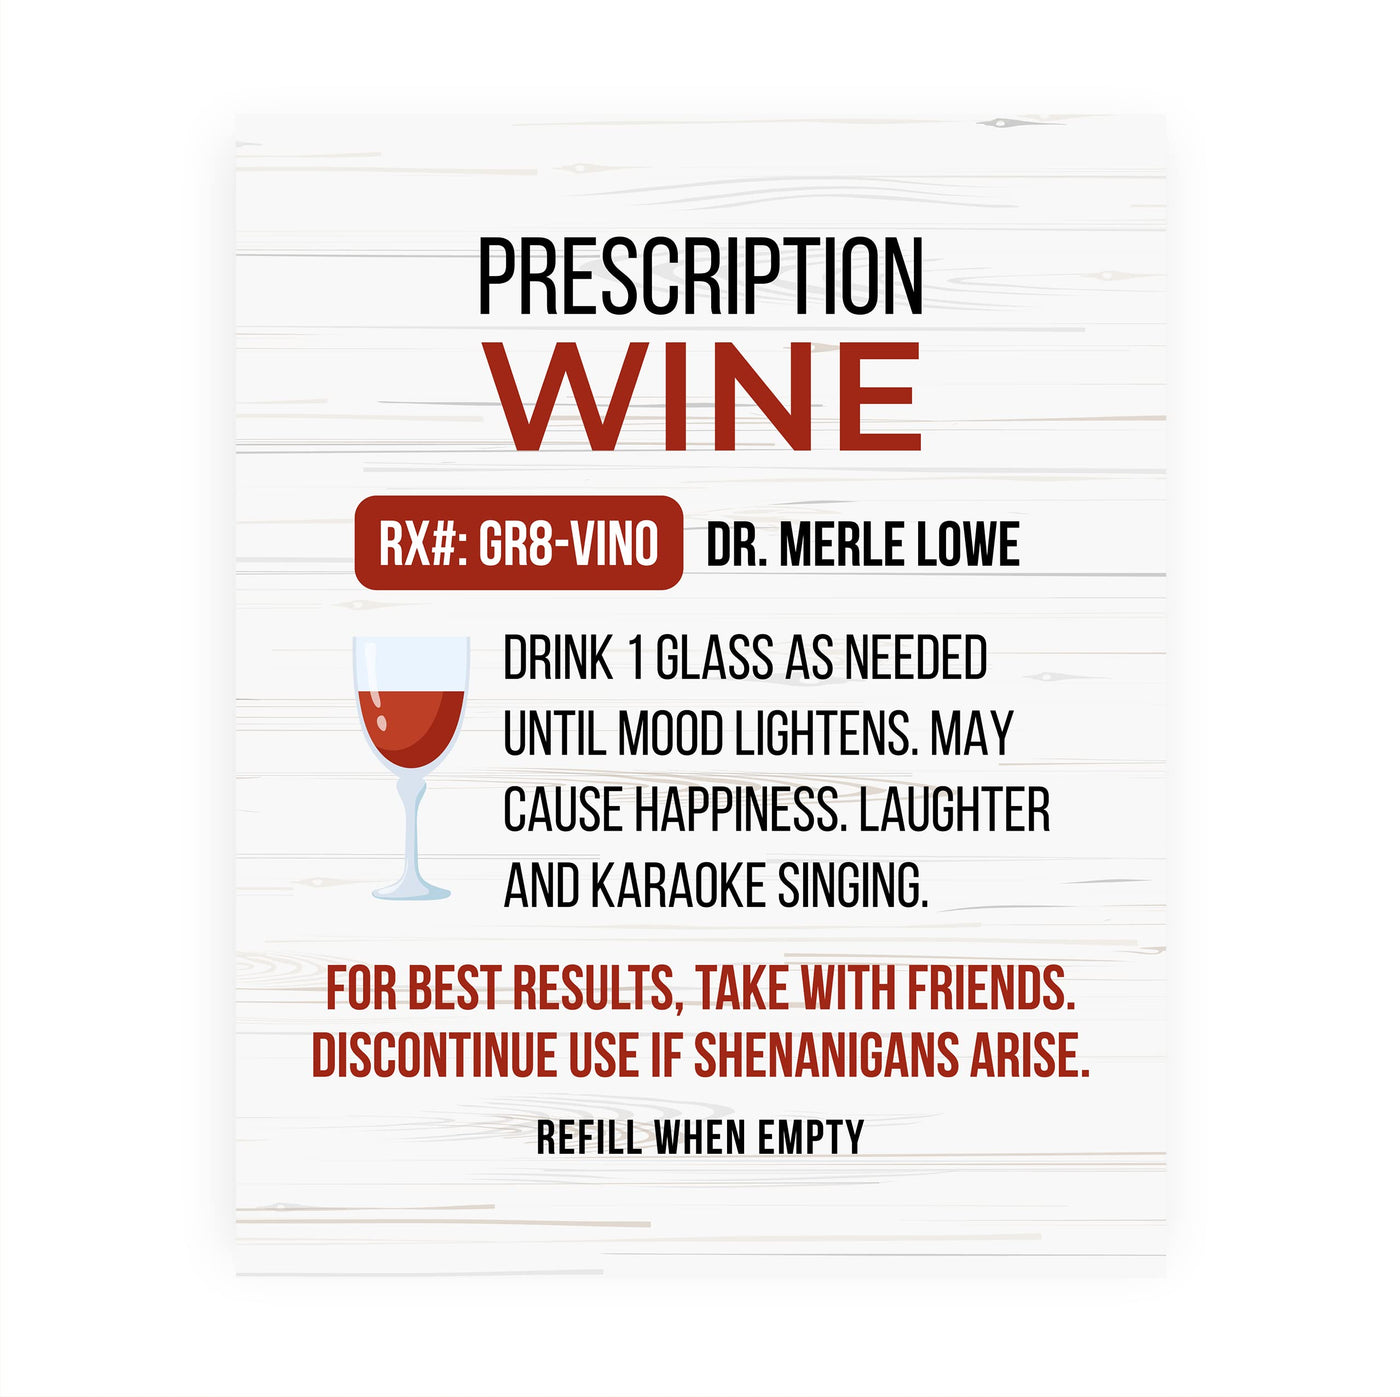 Prescription Wine -Drink One Glass As Needed Funny Wine Sign -8 x 10" Modern Typographic Wall Art Print-Ready to Frame. Humorous Home-Kitchen-Bar-Cave Decor. Perfect Gift for All Wine Lovers!